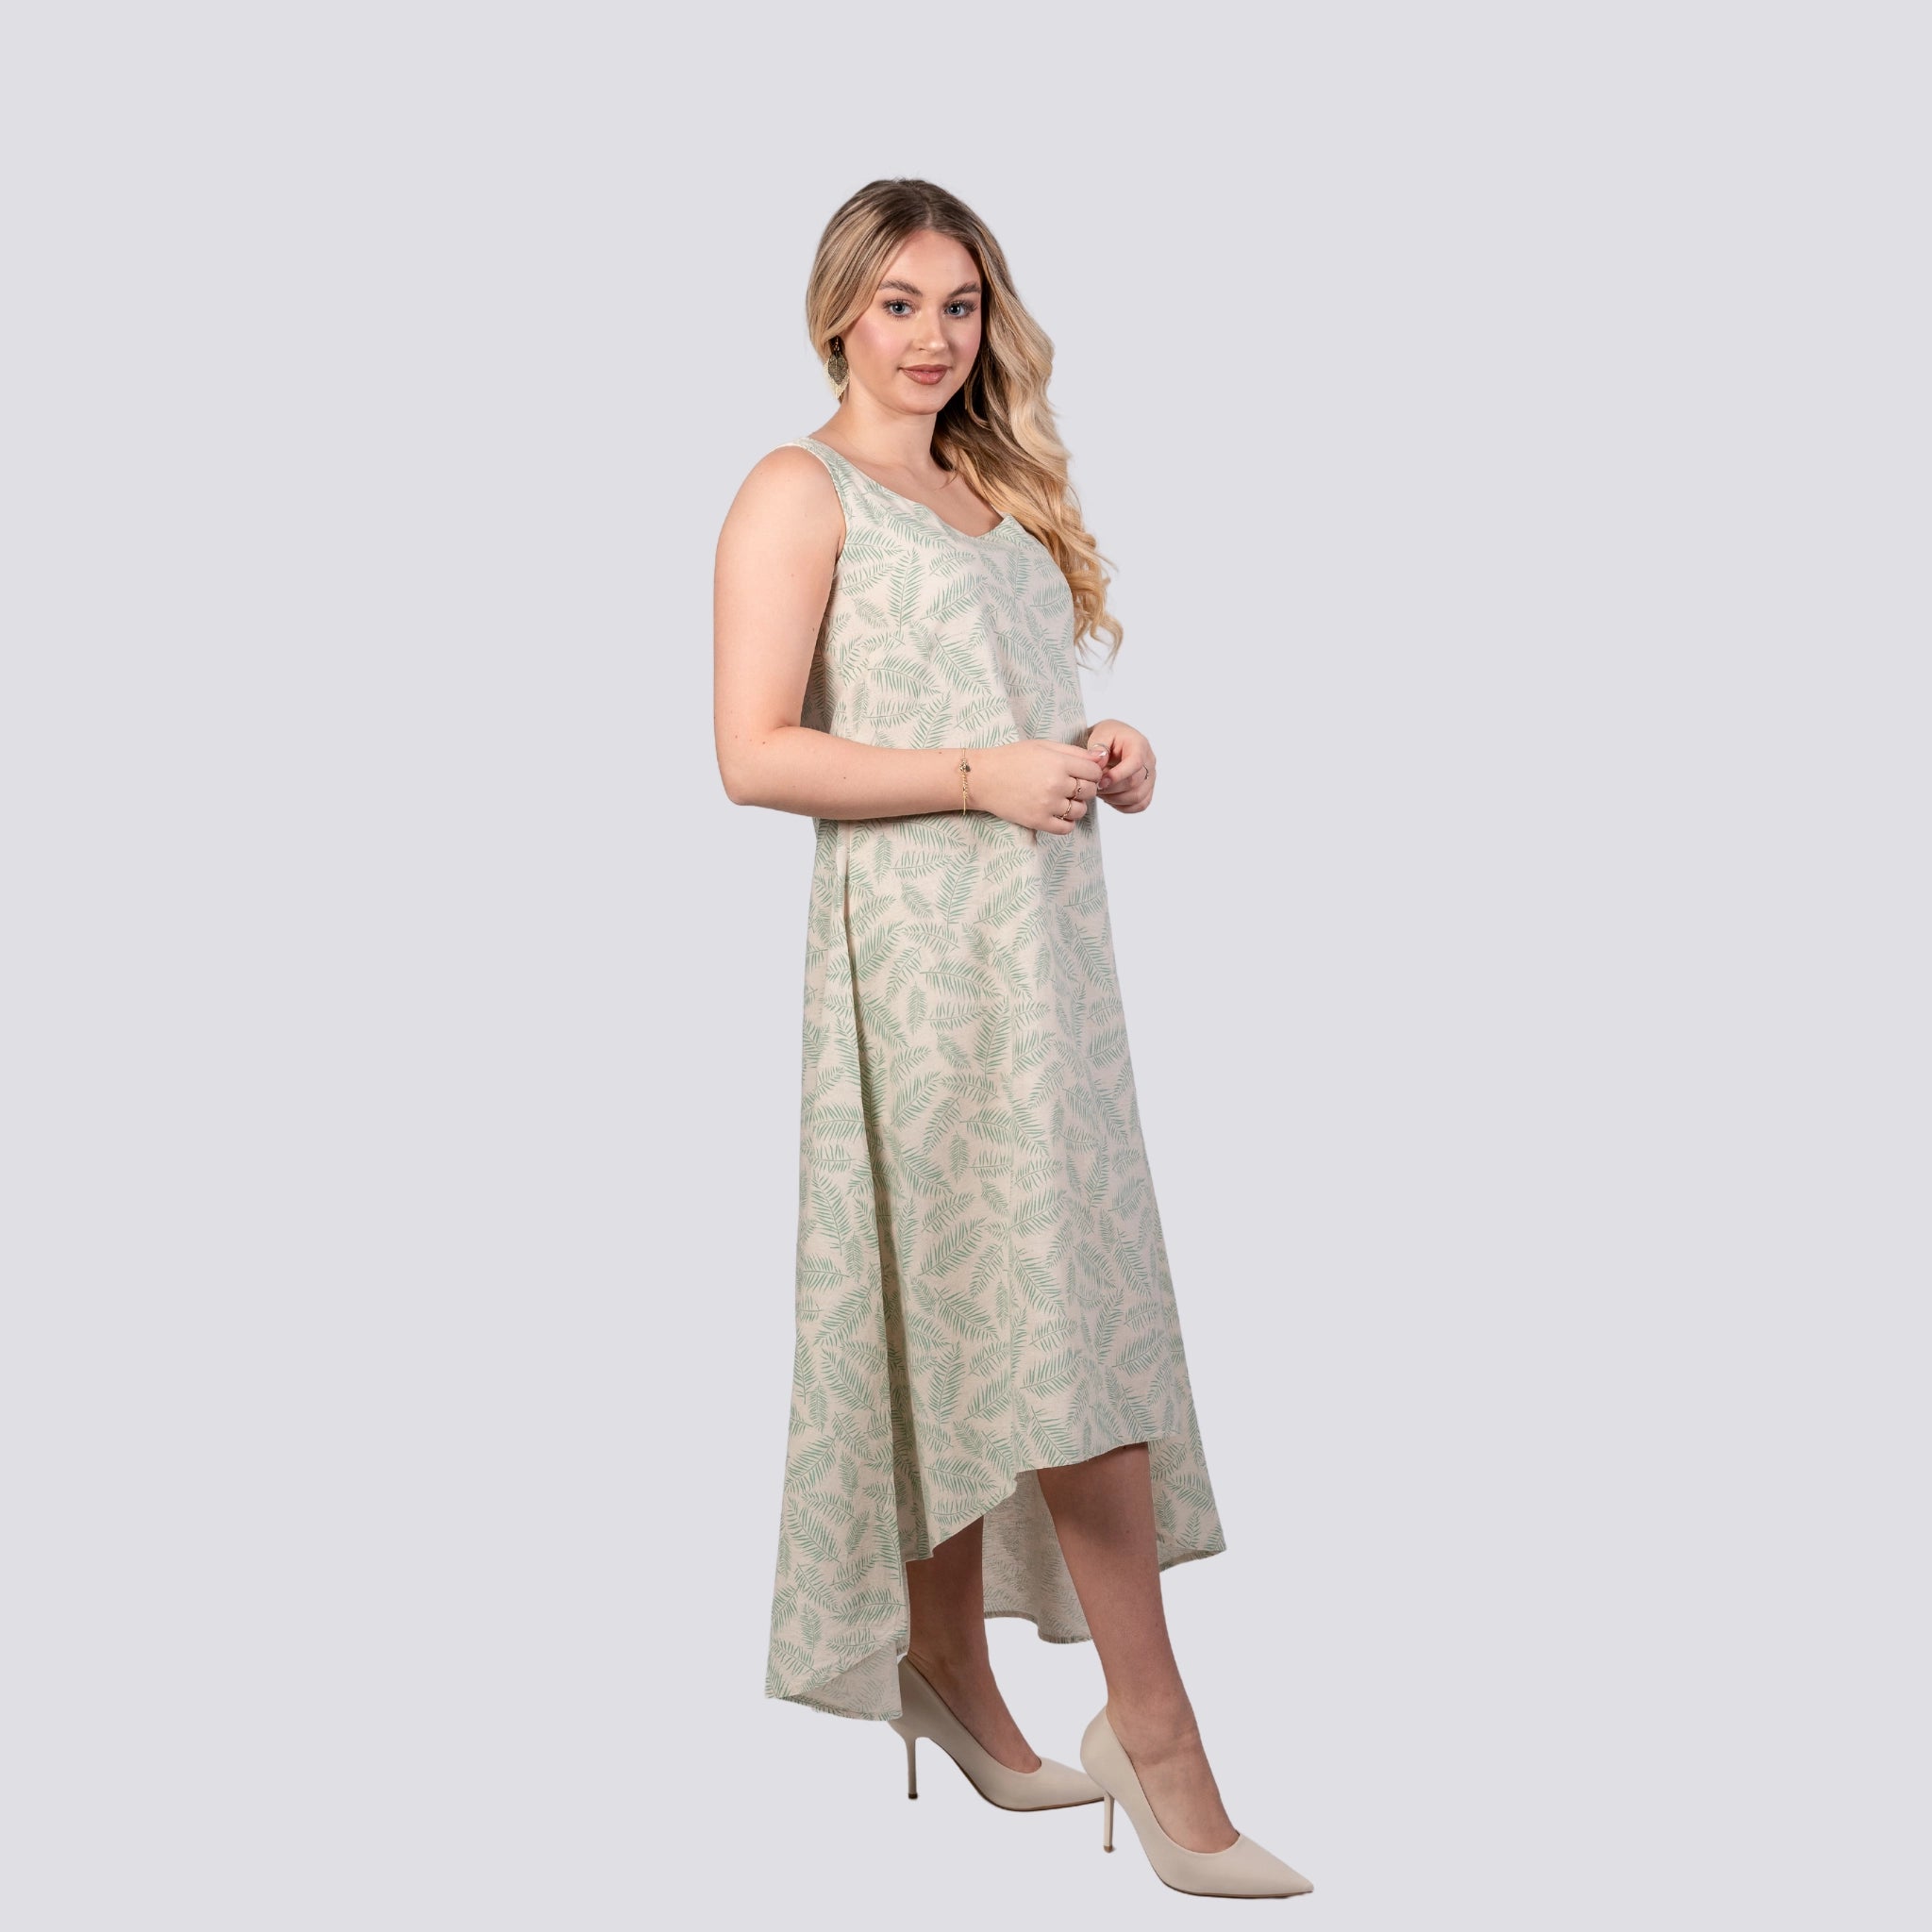 A woman in a sleeveless Karee Eco-Luxe Look: Sustainable Mystic Breeze Linen Hi-Lo Midi Dress for Women, characterized by its light green hue and subtle floral pattern, stands against a plain background. She is wearing beige high-heeled shoes and has long, wavy hair. The dress features a Linen Cotton Blend fabric and an elegant High Low Hemline.